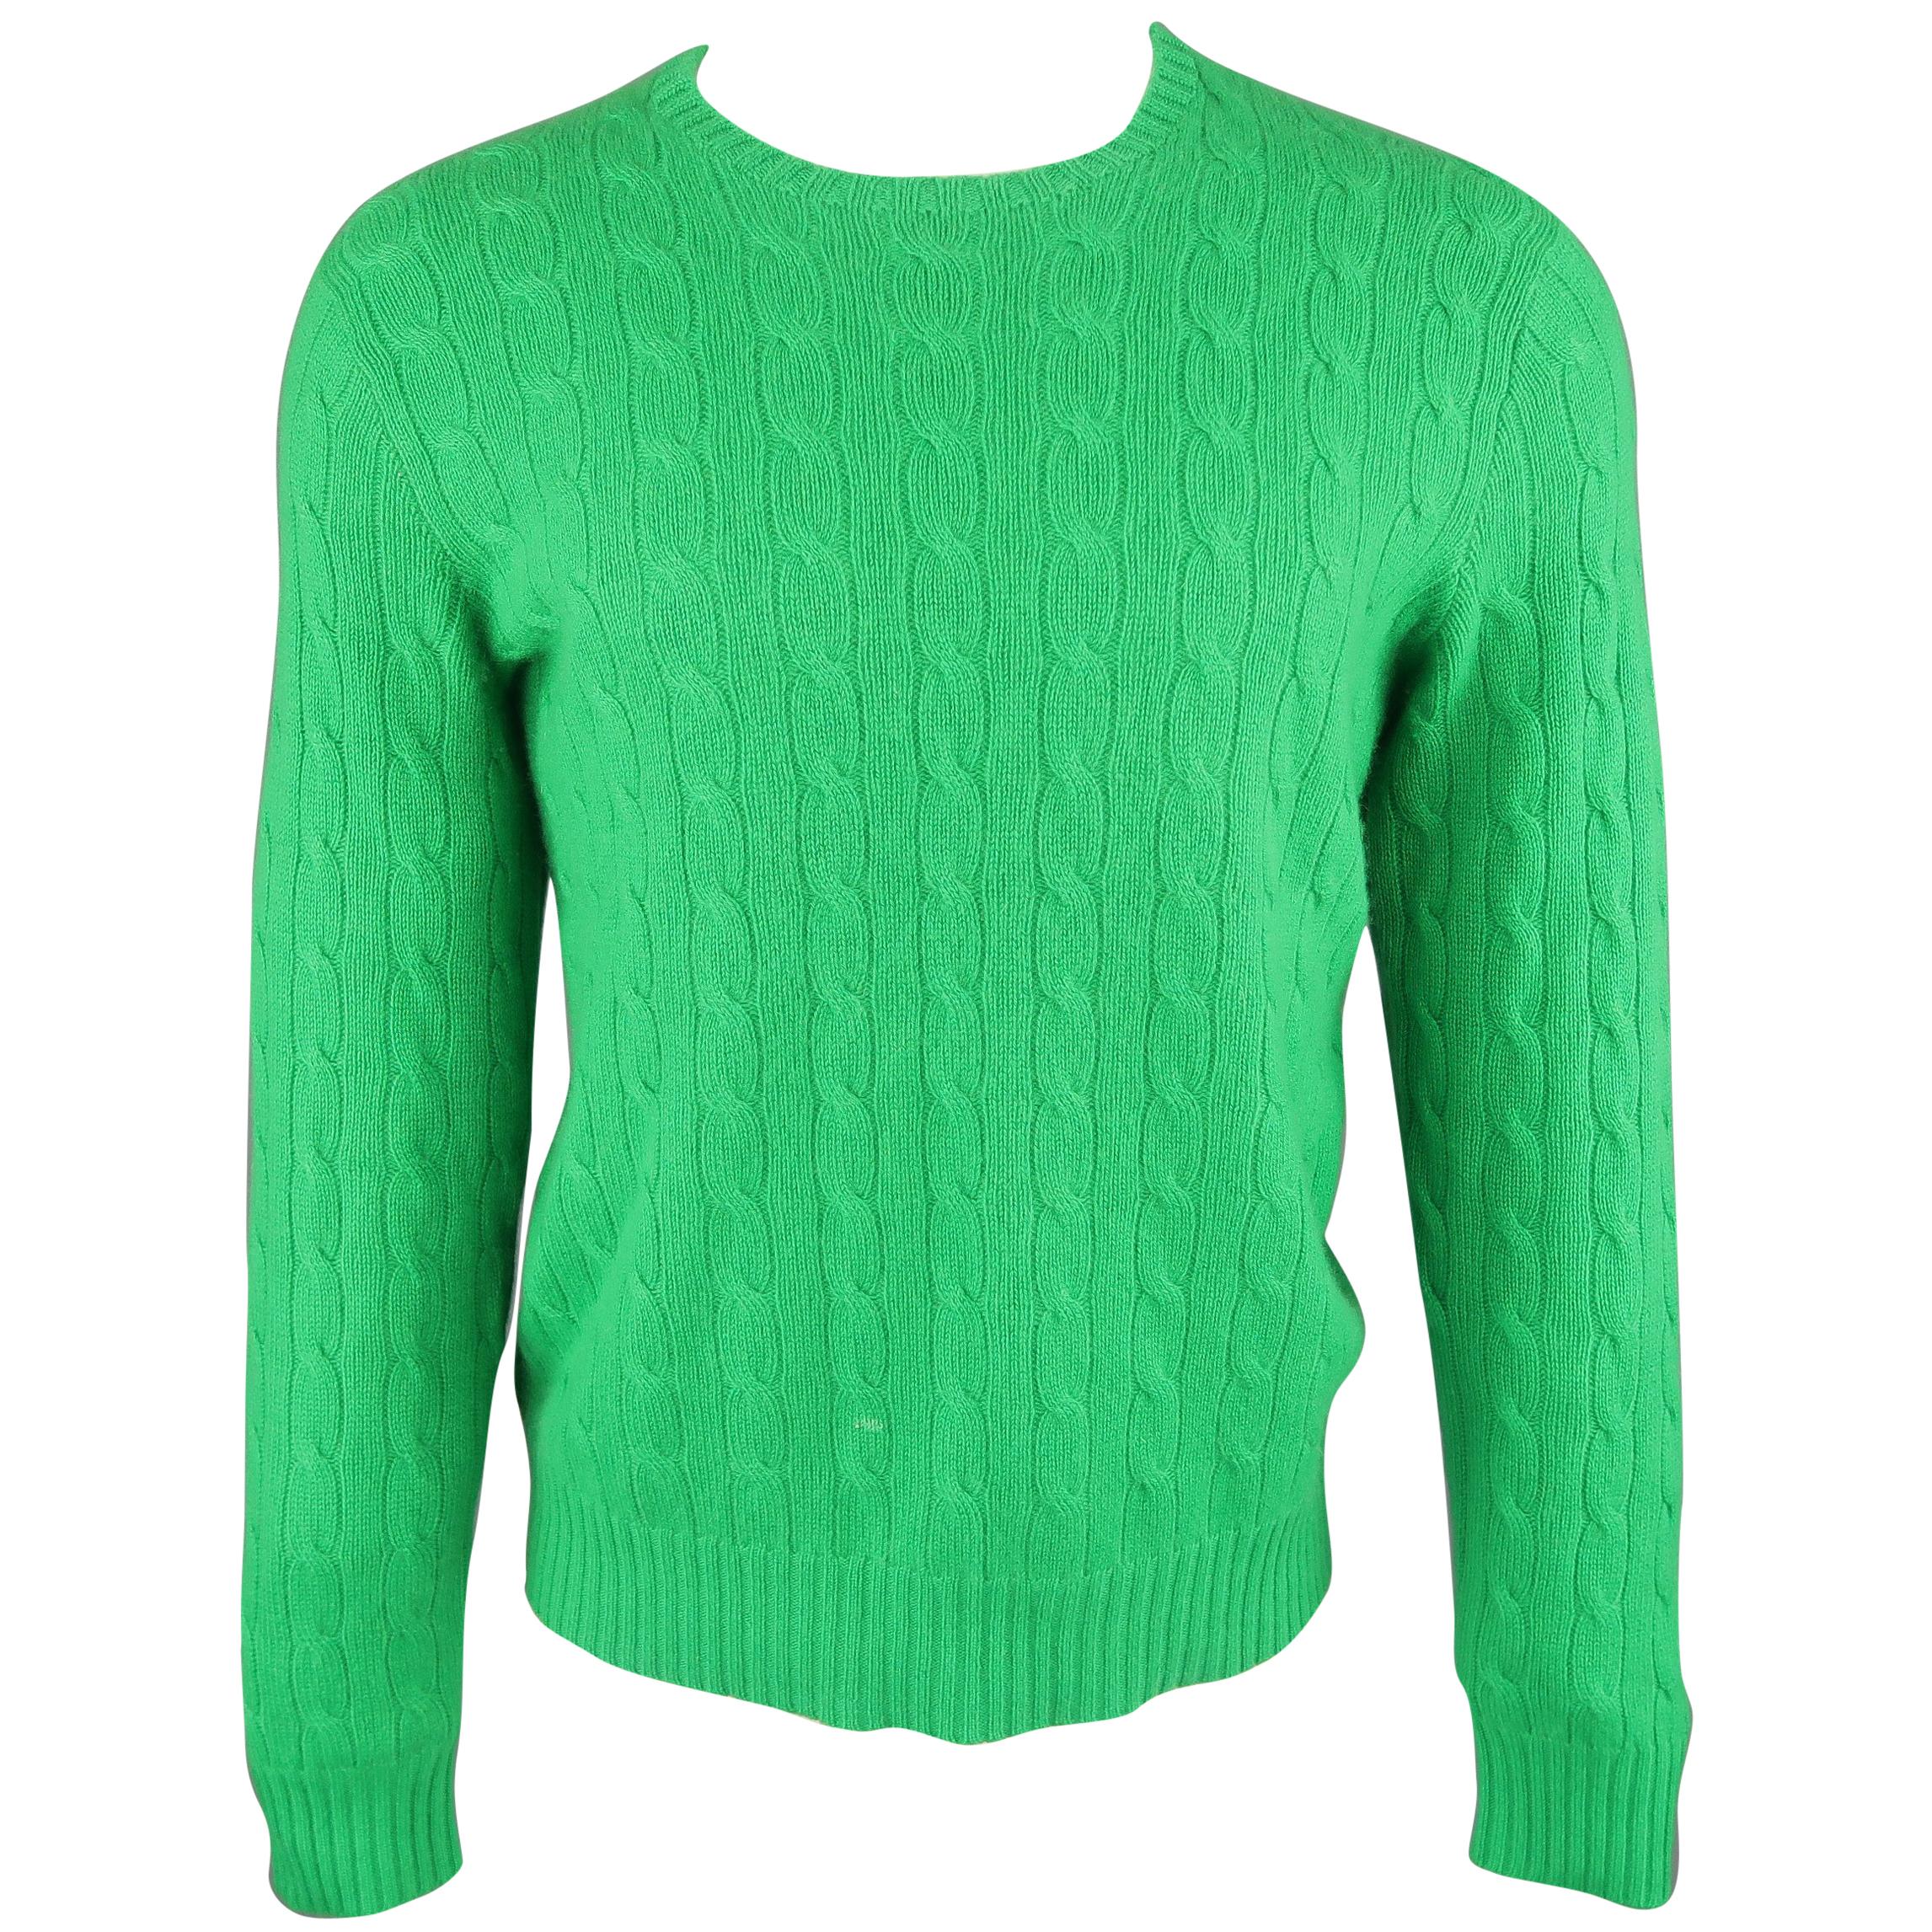 Ralph Lauren Green Cable Knit Cashmere Sweater